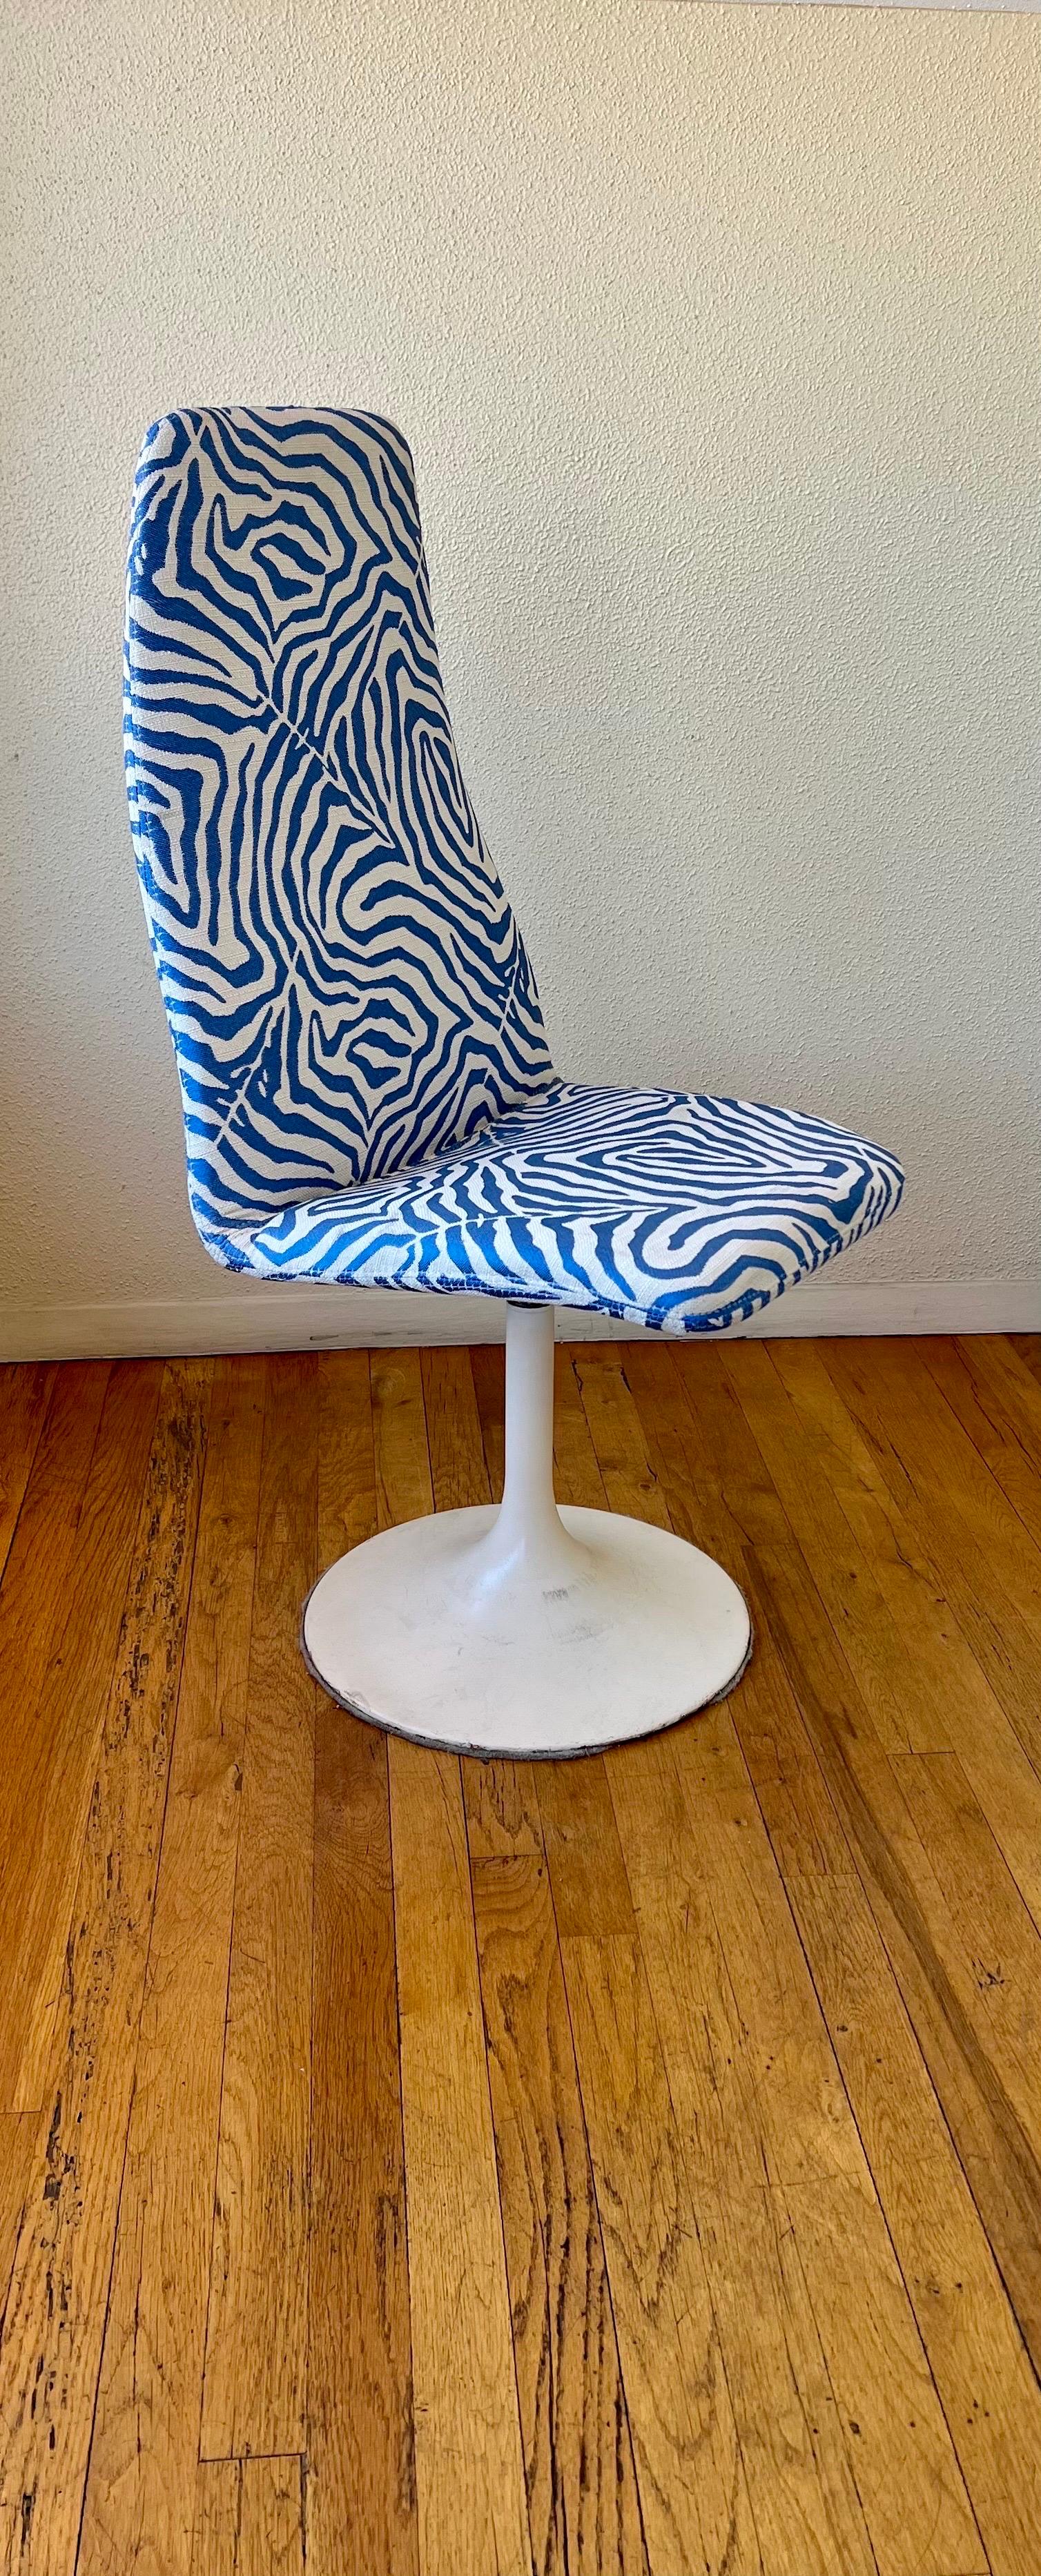 Striking tall back pair of chairs, with original zebra fabric print the chairs swivel and are in very clean condition.